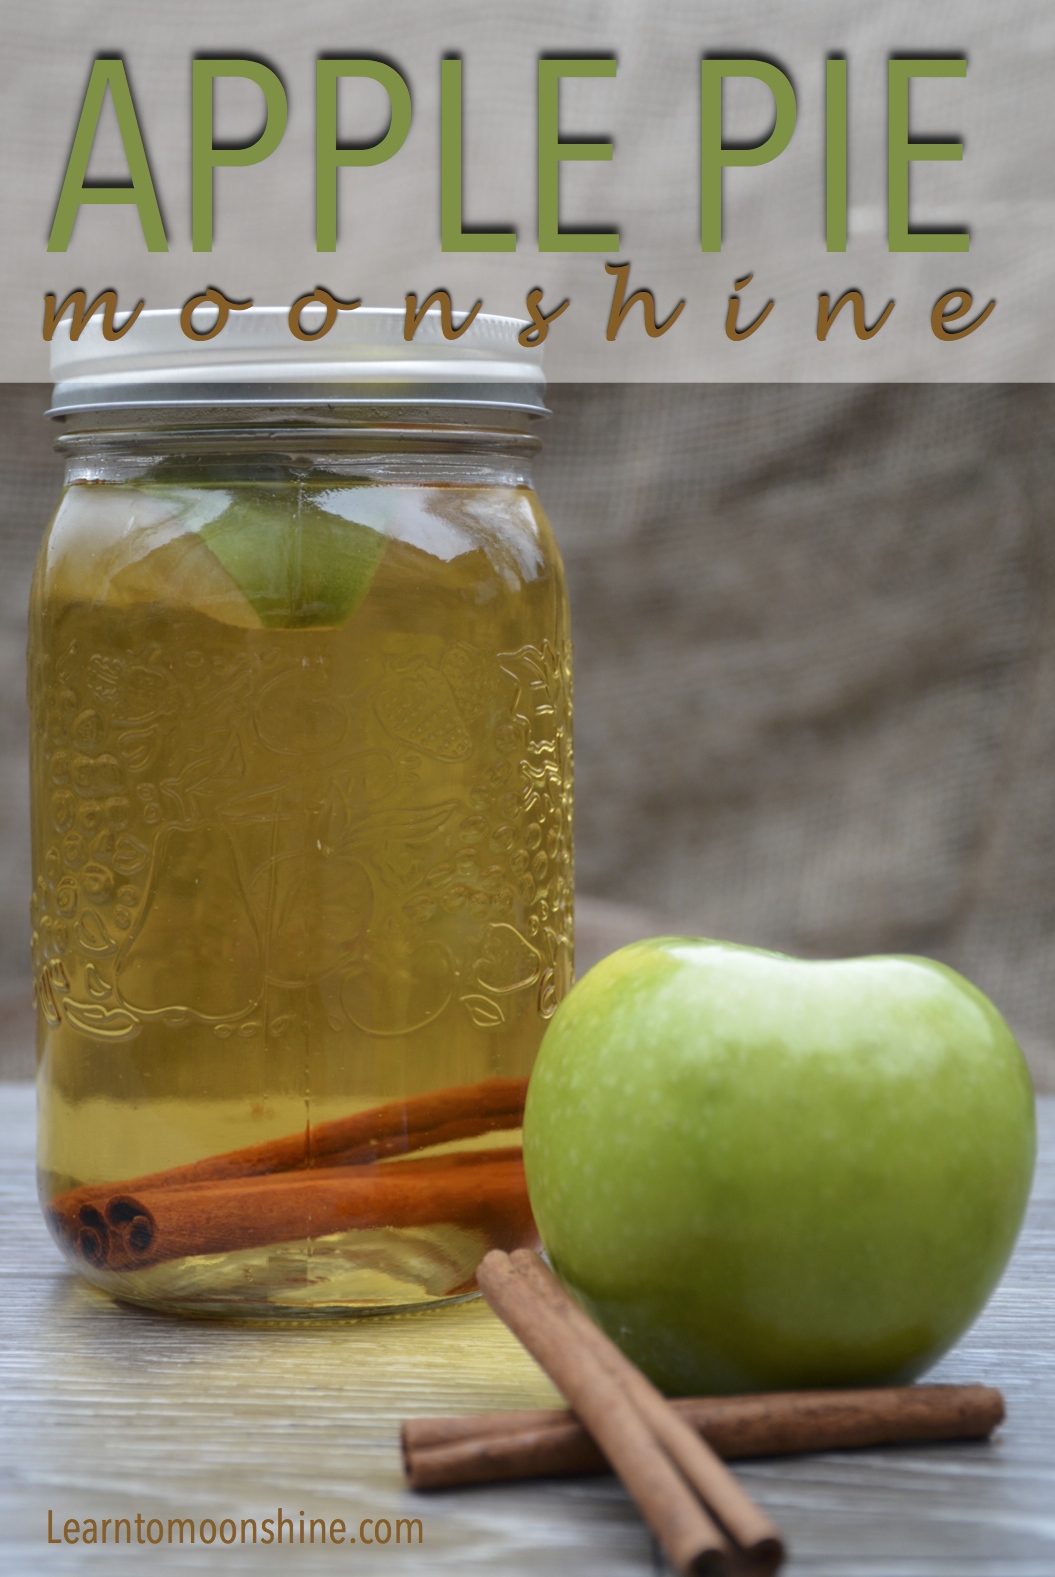 Granny S Apple Pie Moonshine Recipe This Will Kick Your Ass Drink With Caution Learn To Moonshine